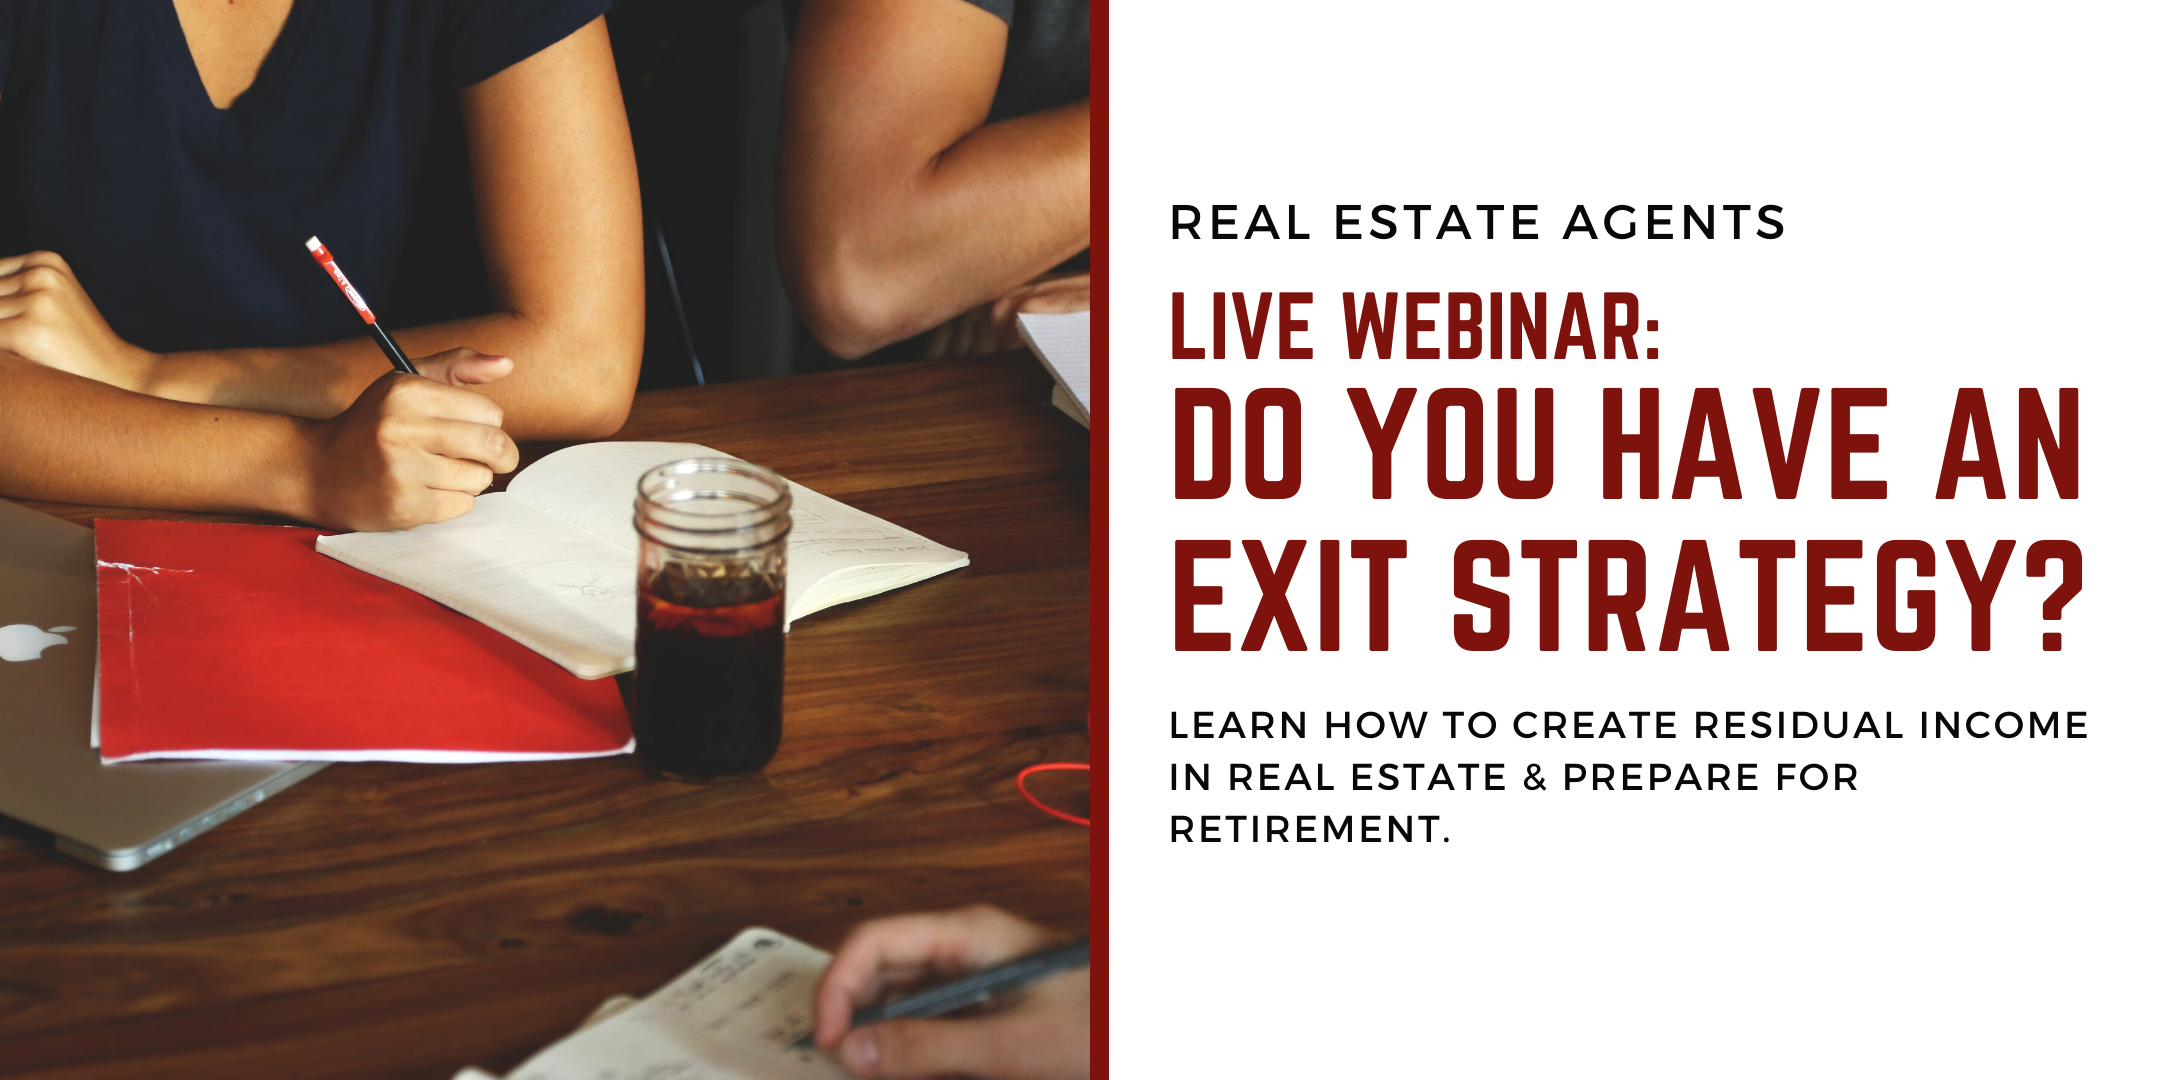 LIVE WEBINAR: Create a Retirement Strategy and Start Building YOUR Real Estate Team